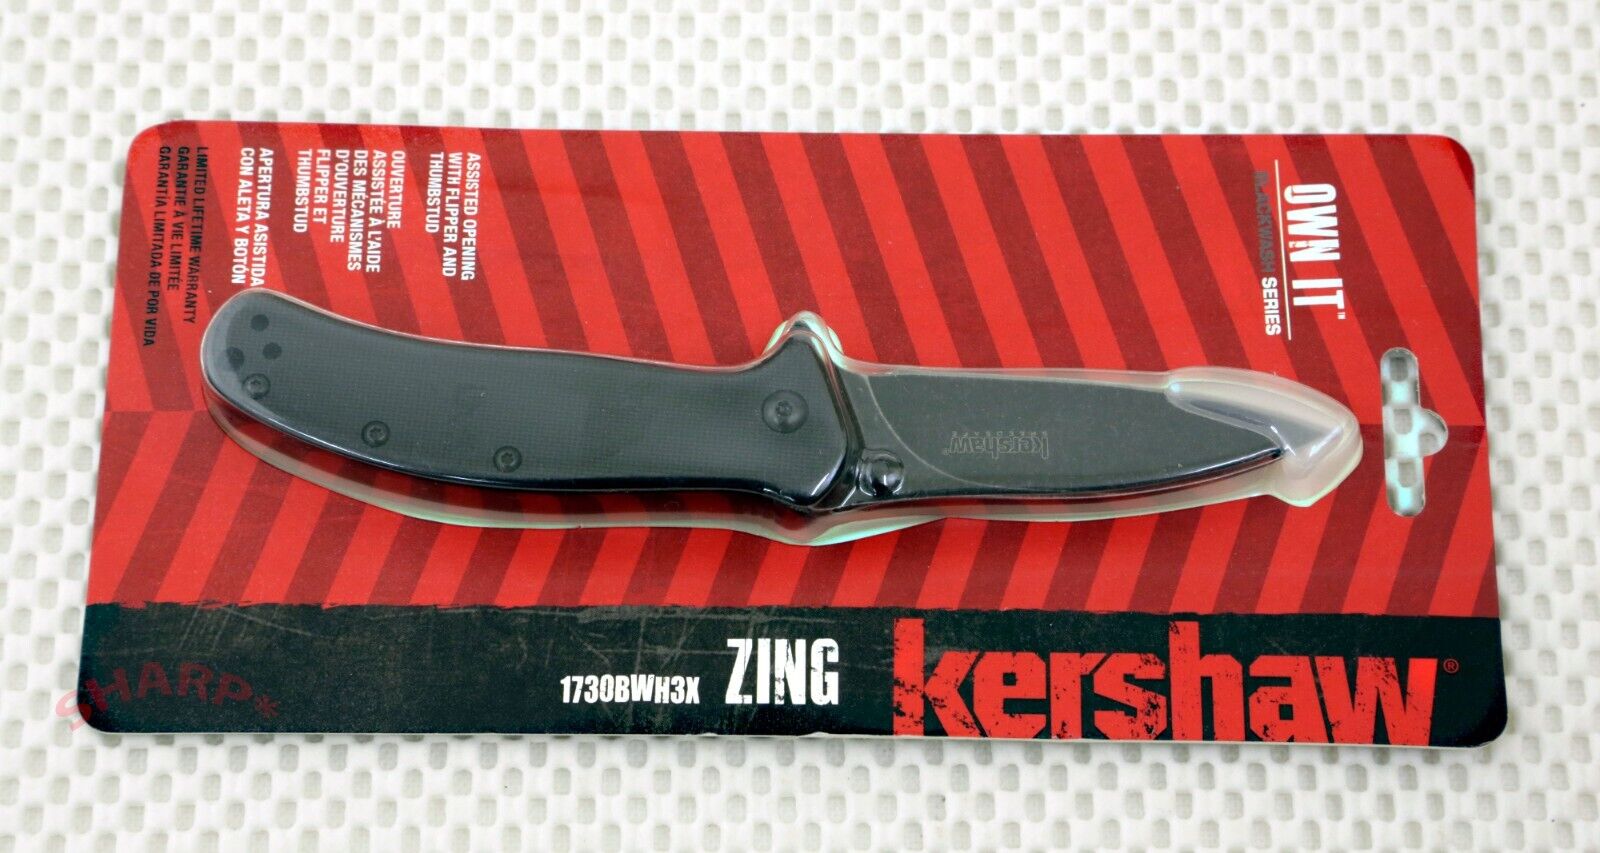 # 1730BWH3 Kershaw Zing Pocket Knife *NEW on Card* assisted opener Drop point